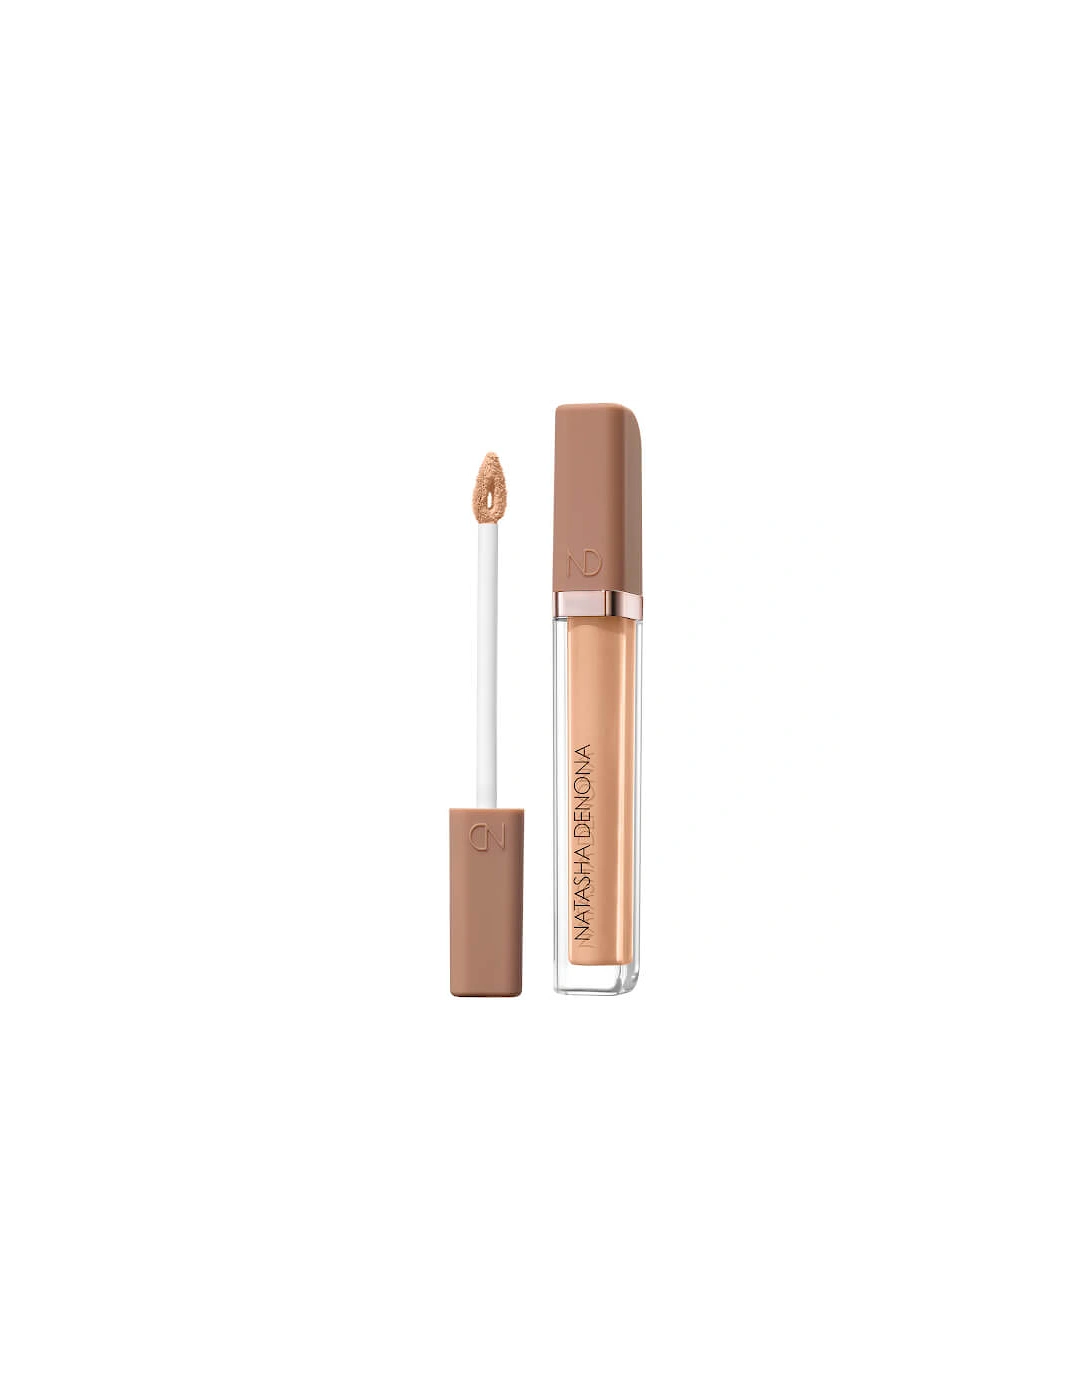 Hy-Glam Concealer - P3, 2 of 1